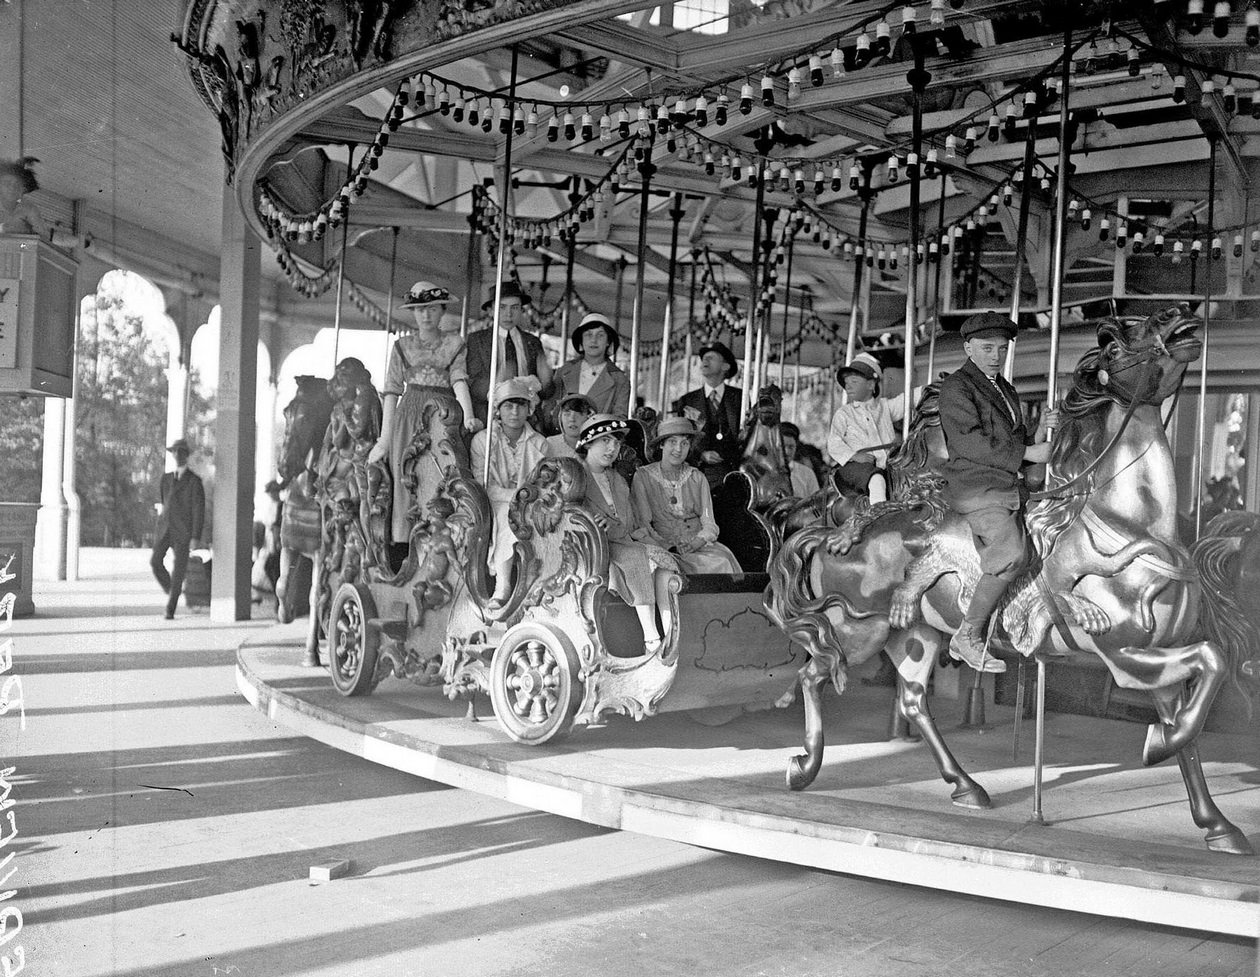 Children and adults on merry-go-round at Riverview Park, Chicago, Illinois, 1915.